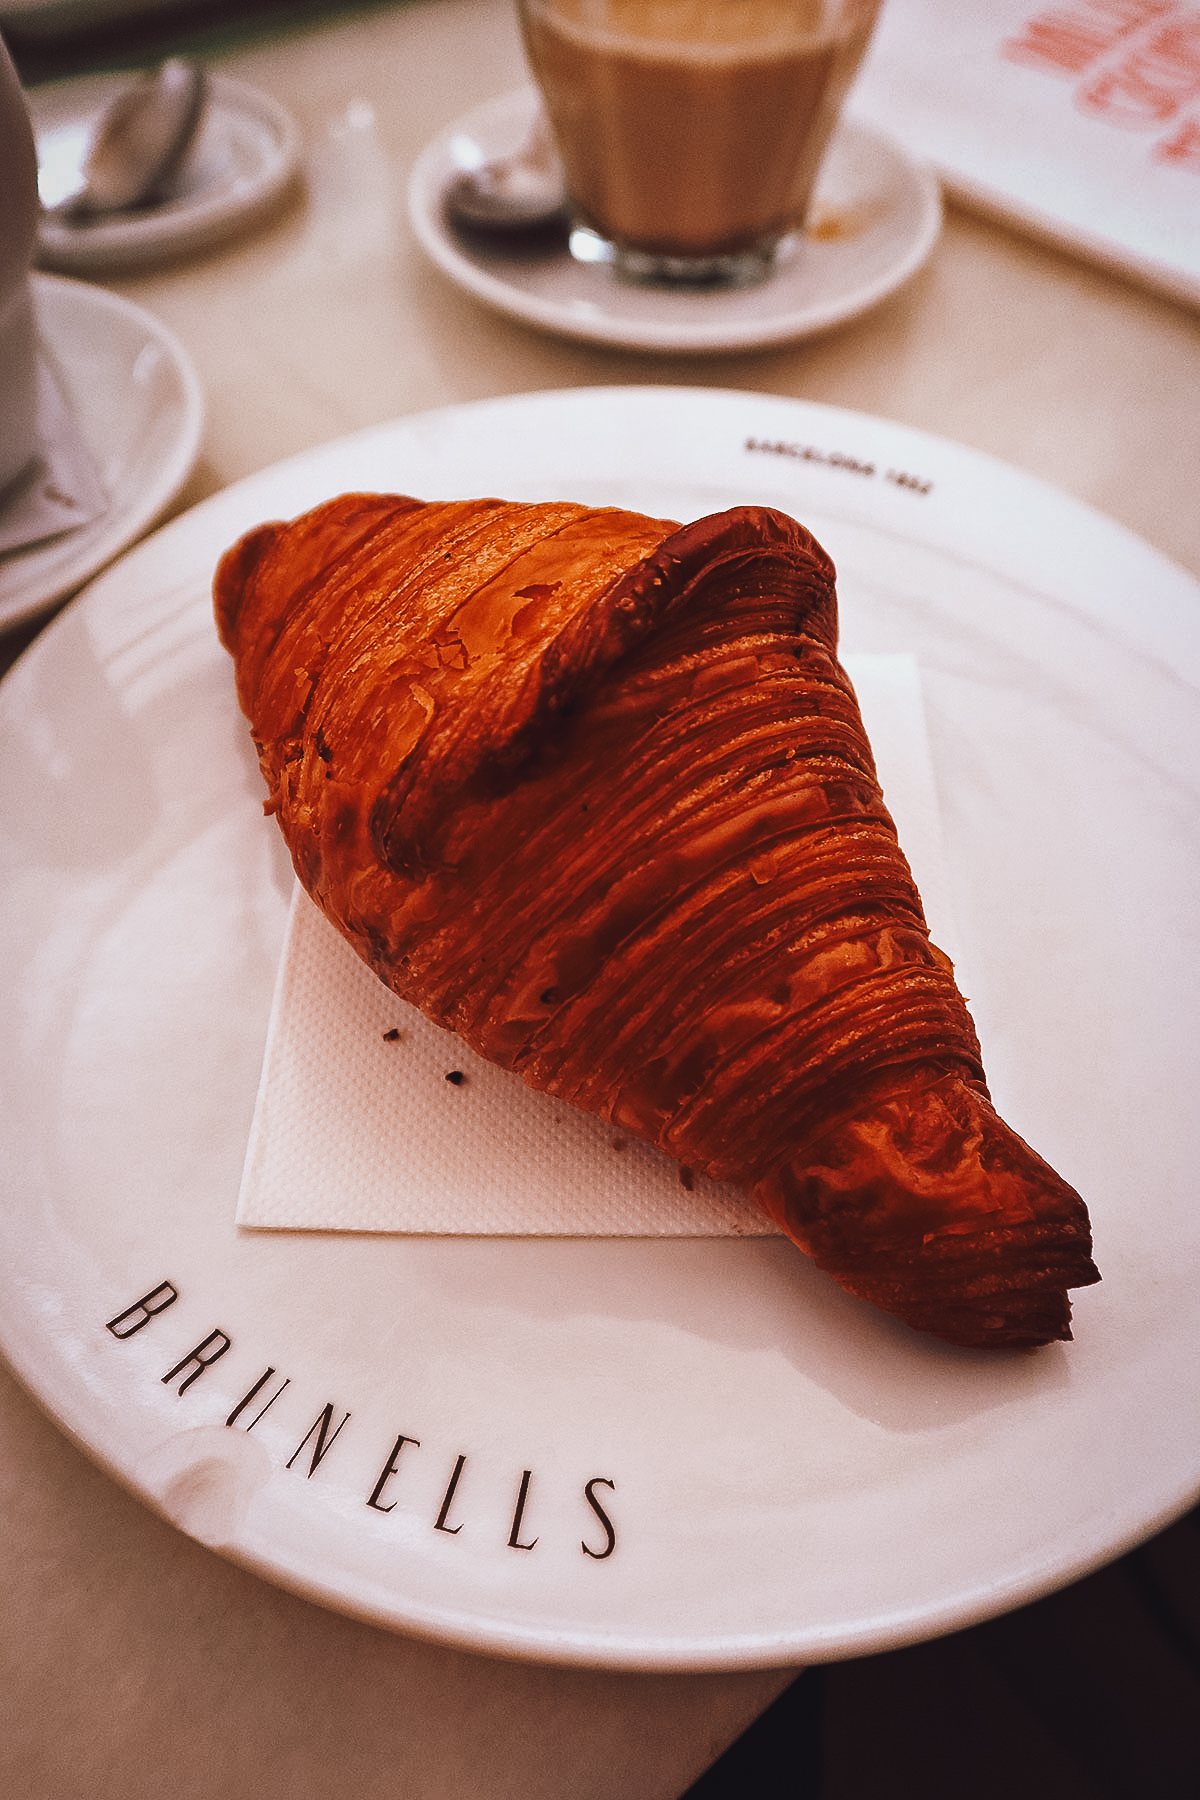 Croissant at a restaurant in Barcelona